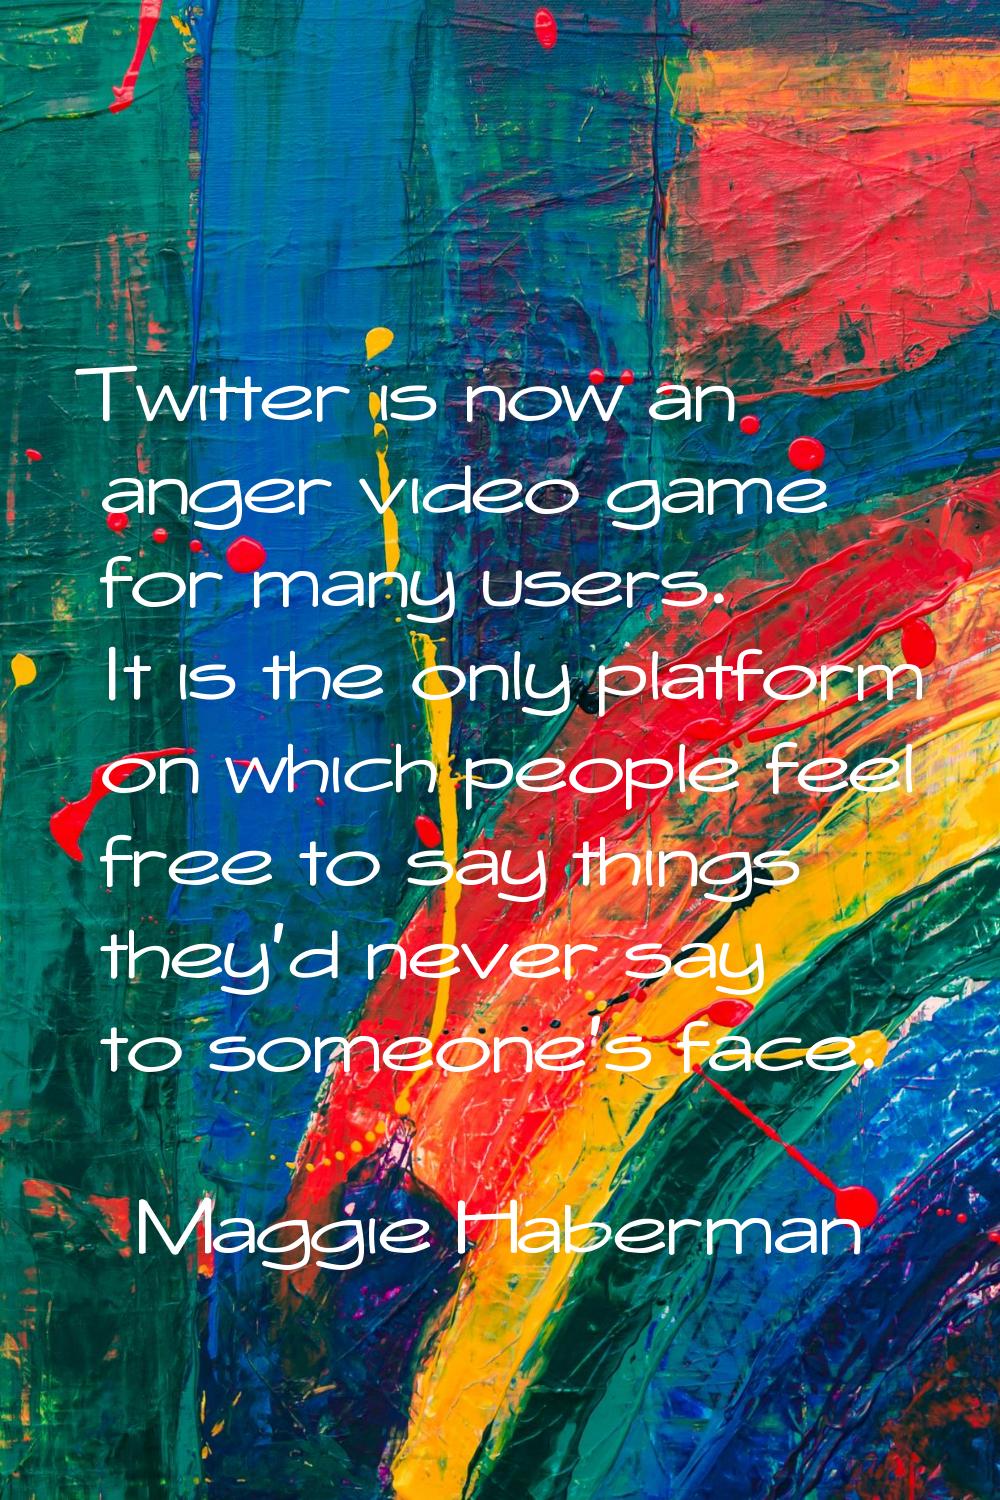 Twitter is now an anger video game for many users. It is the only platform on which people feel fre